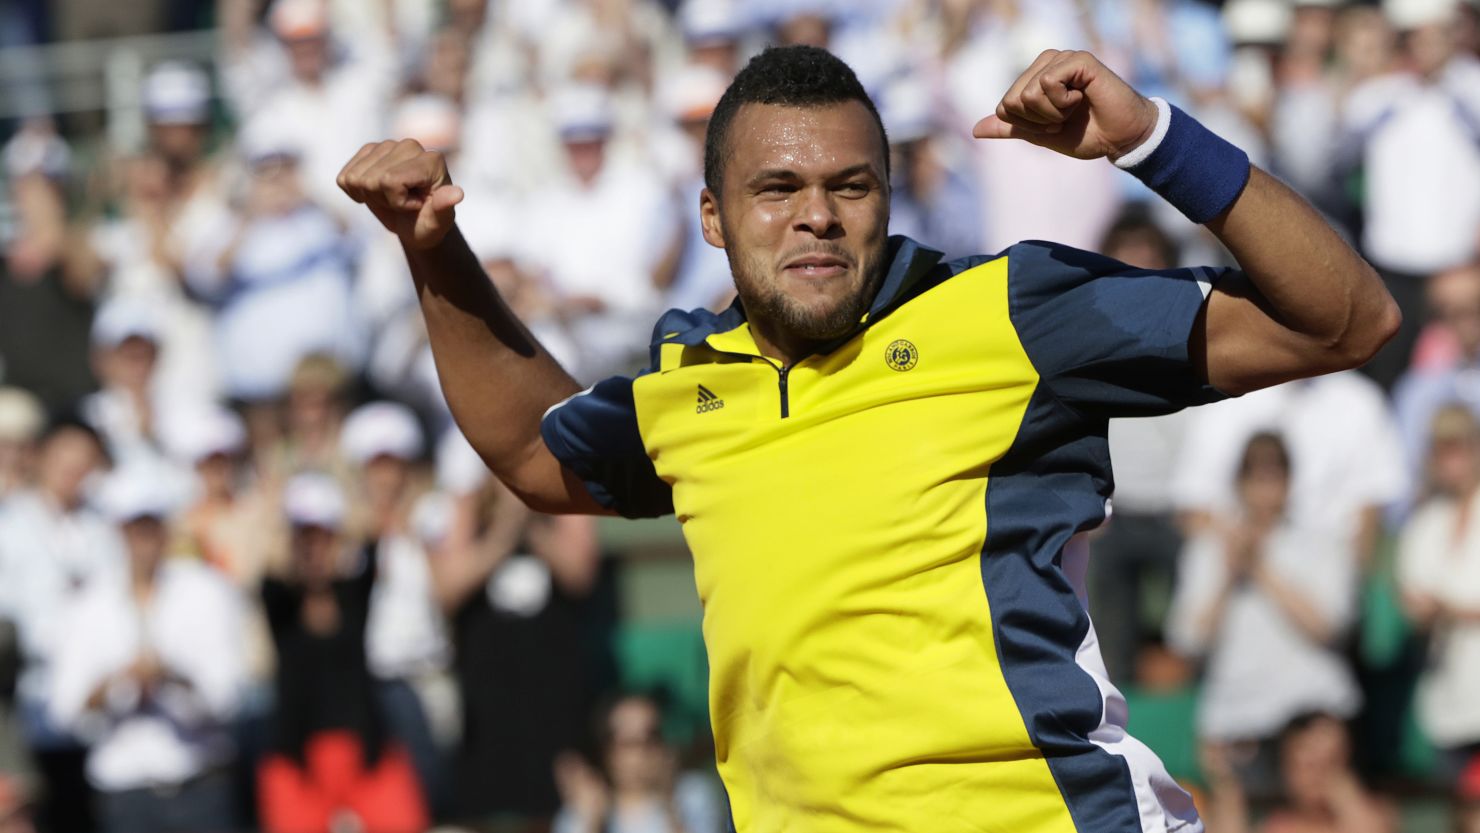 Tsonga will play David Ferrer in the semifinals as he bids to end France's 30-year wait for a men's champion at Roland Garros